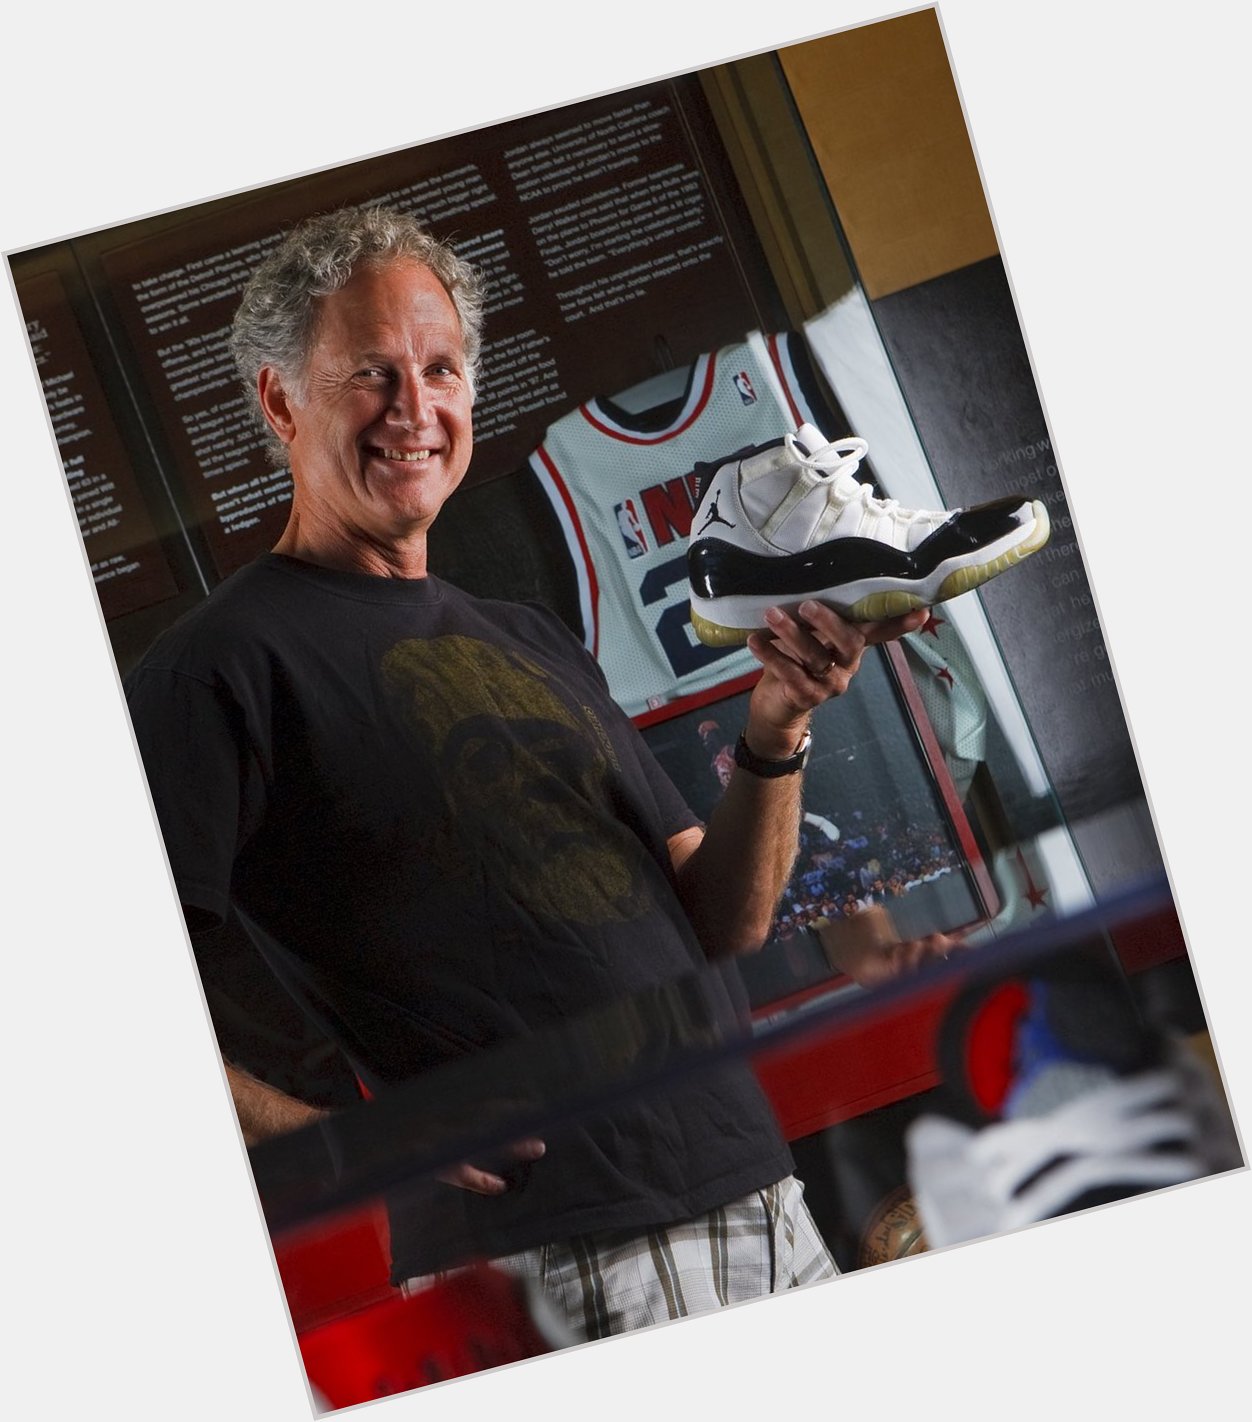 Our modern day Picasso. Happy birthday to Tinker Hatfield. 